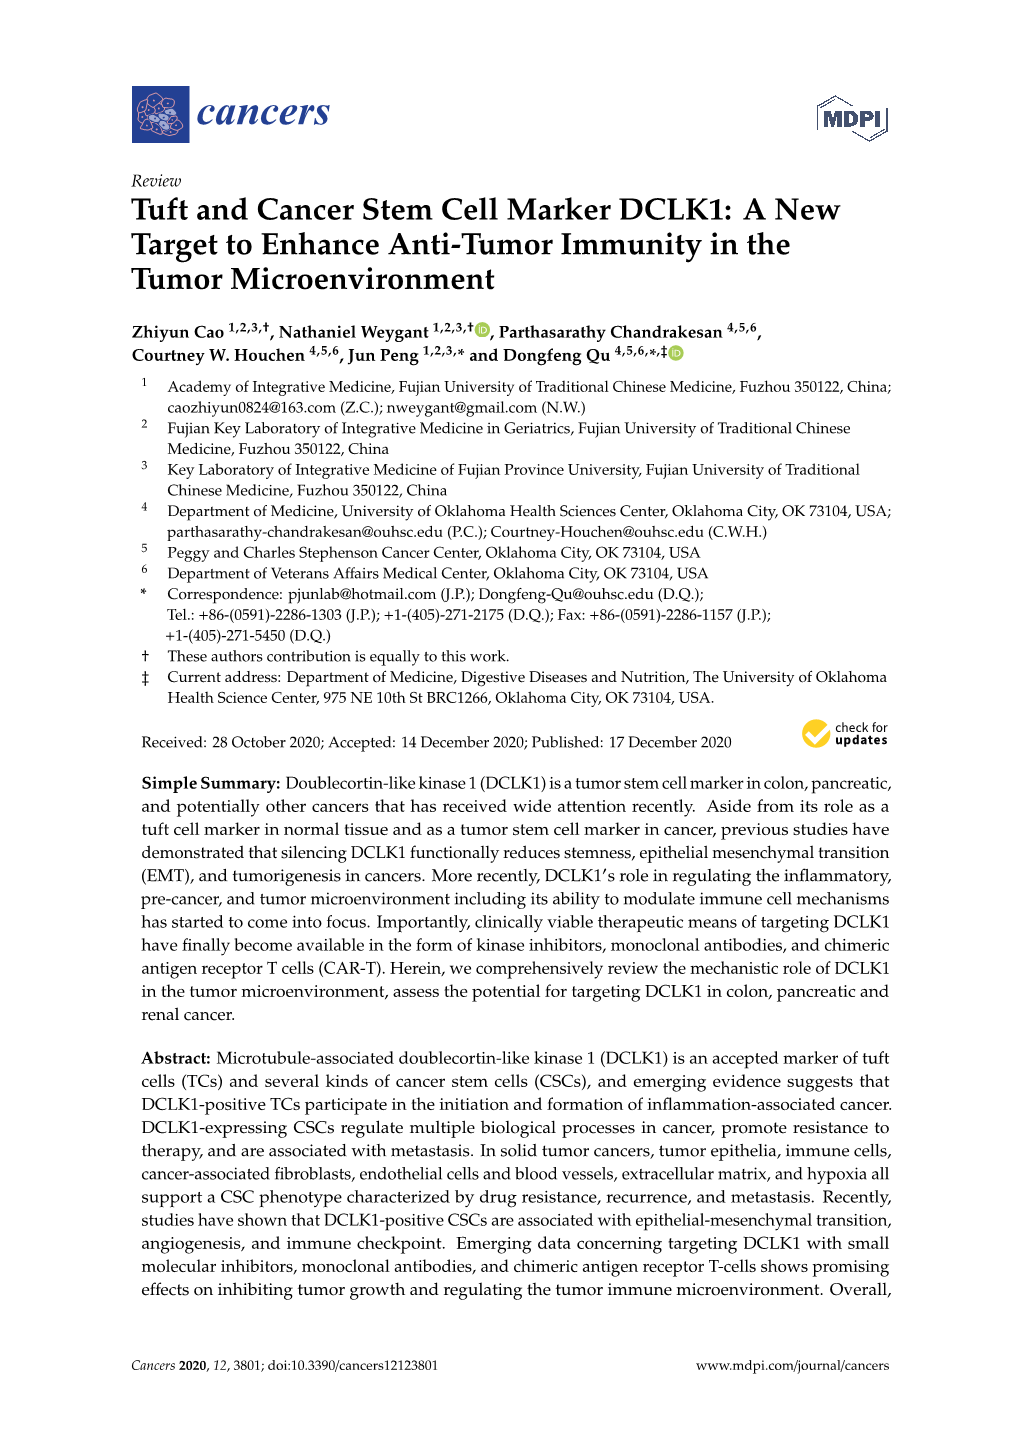 Tuft and Cancer Stem Cell Marker DCLK1: a New Target to Enhance Anti-Tumor Immunity in the Tumor Microenvironment